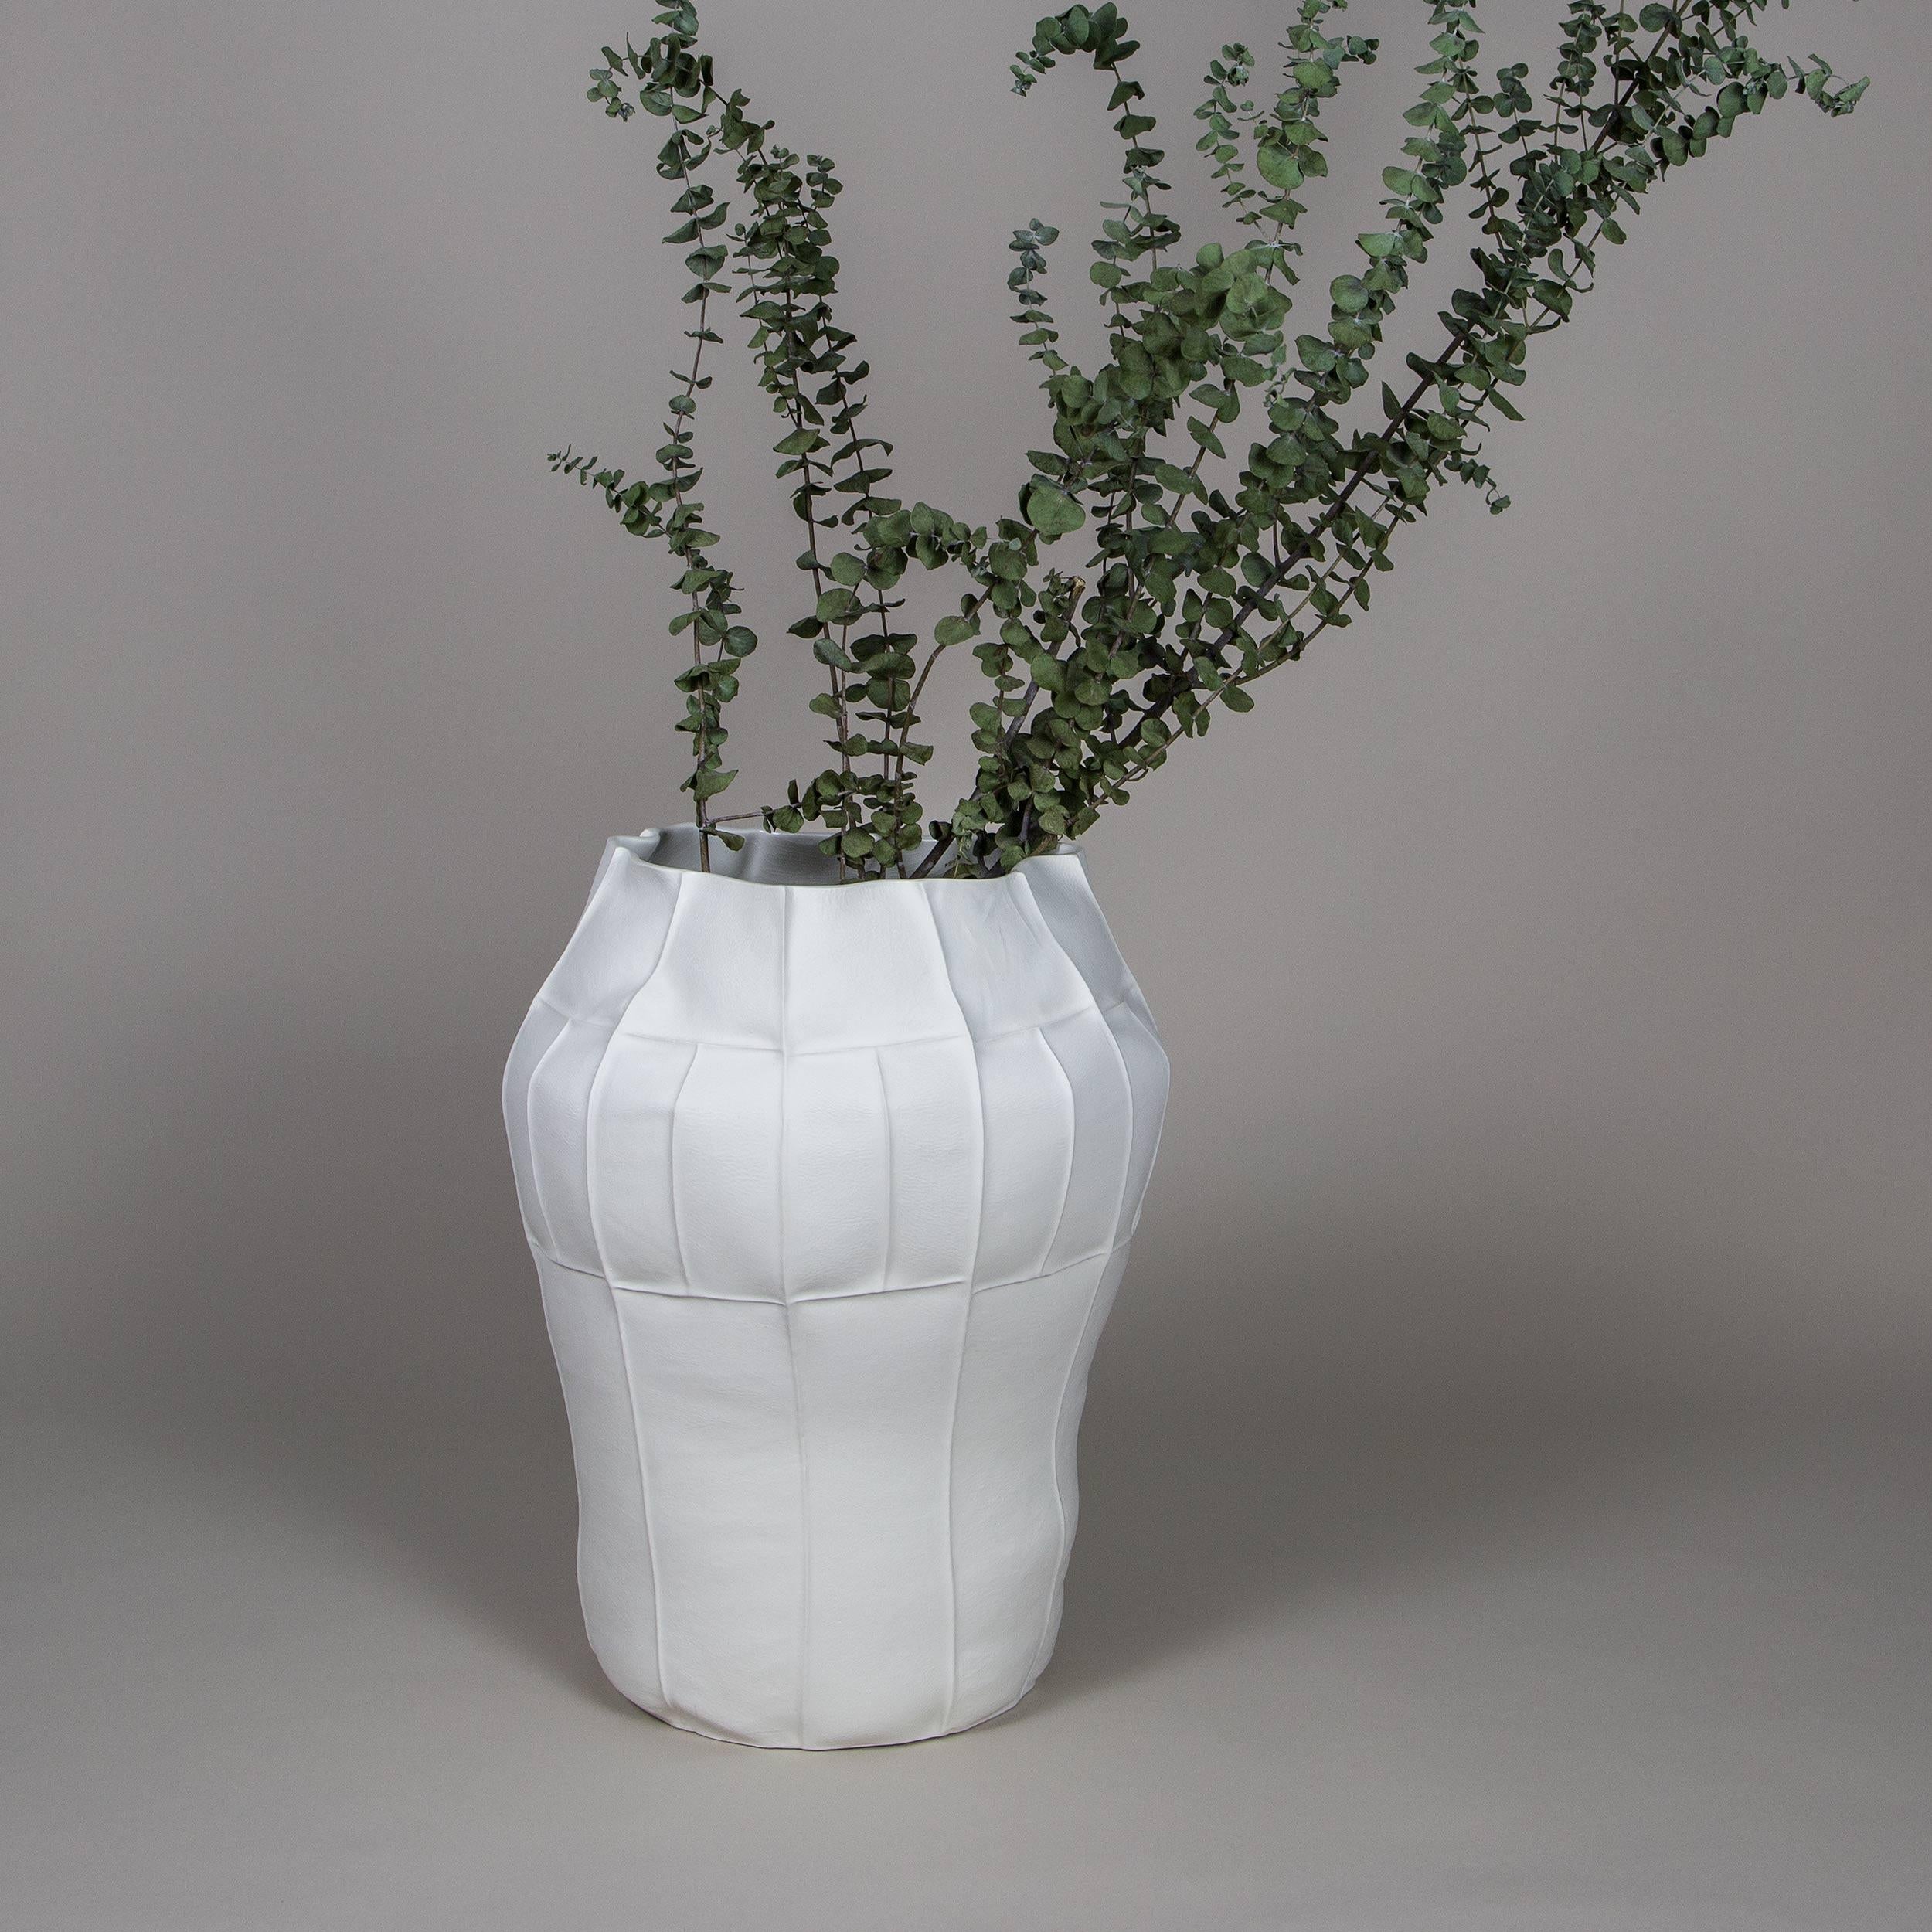 A tall oversized porcelain vessel with leather textured exterior surface and clear glazed interior. As a result of the production process each item is one-of-a-kind. 

A multitude of small leather panels are sewn together to create the leather mold